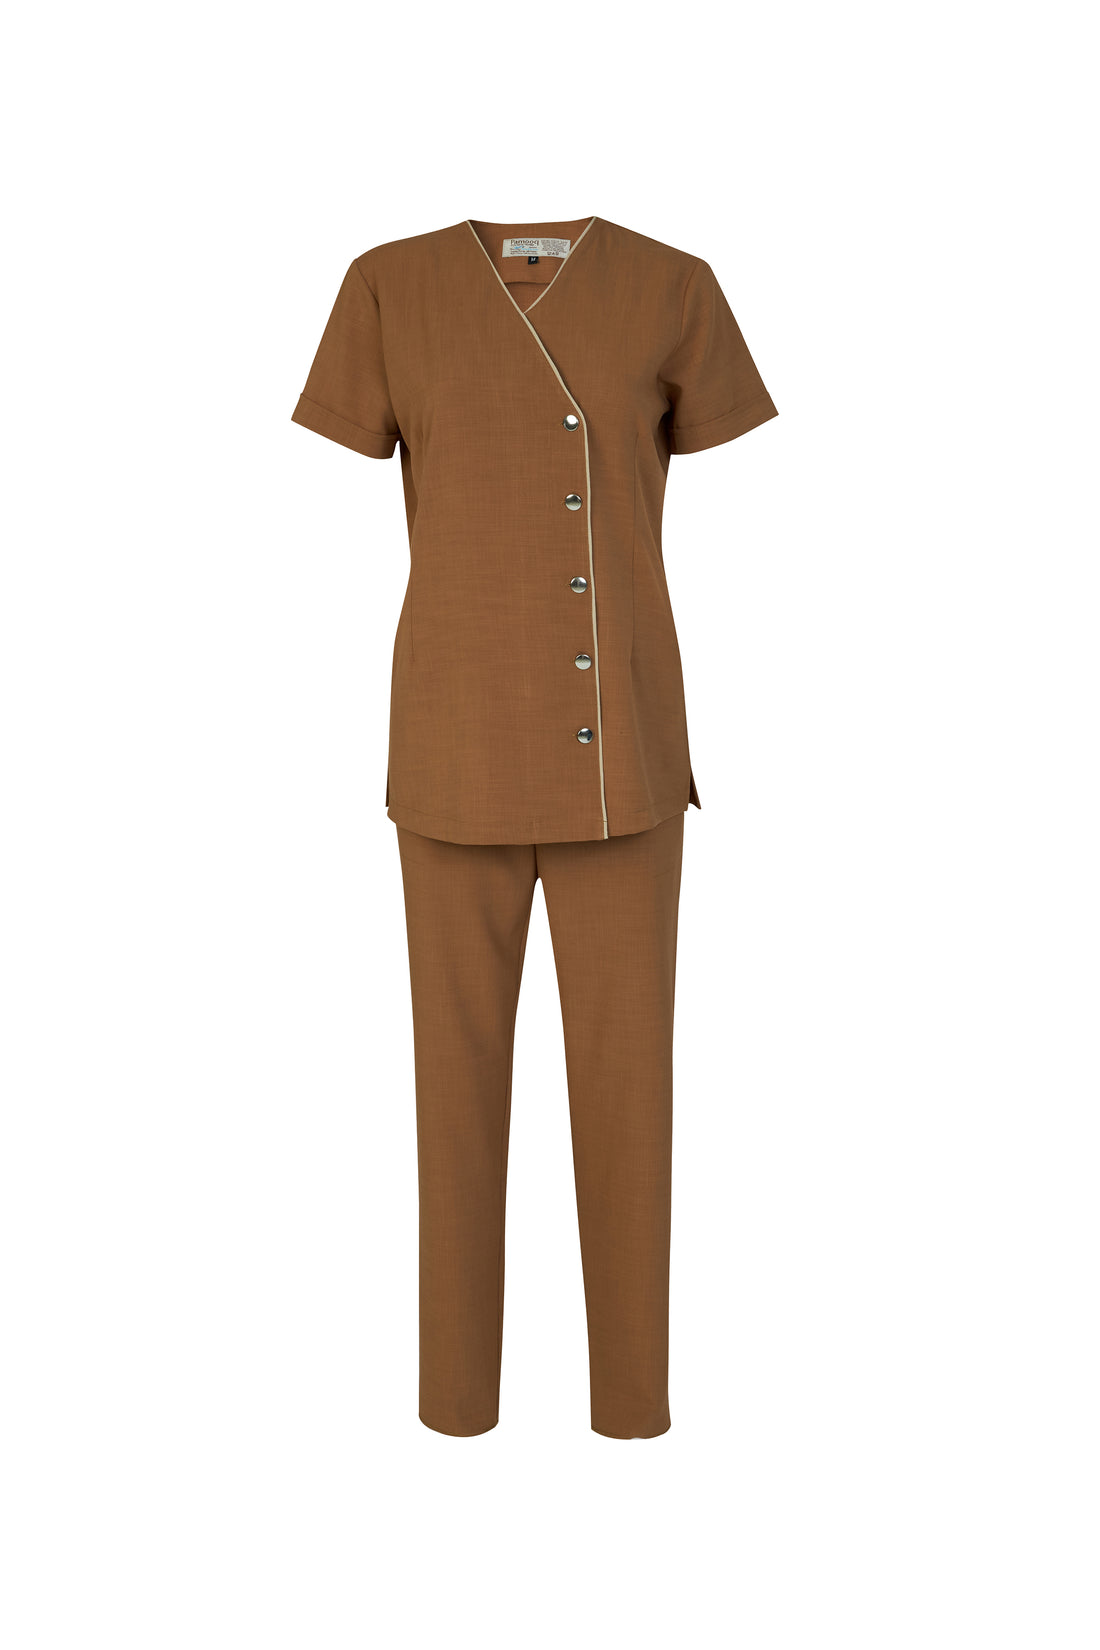 Lucy Spa Therapist and Attendant  Uniform in Mocha Brown